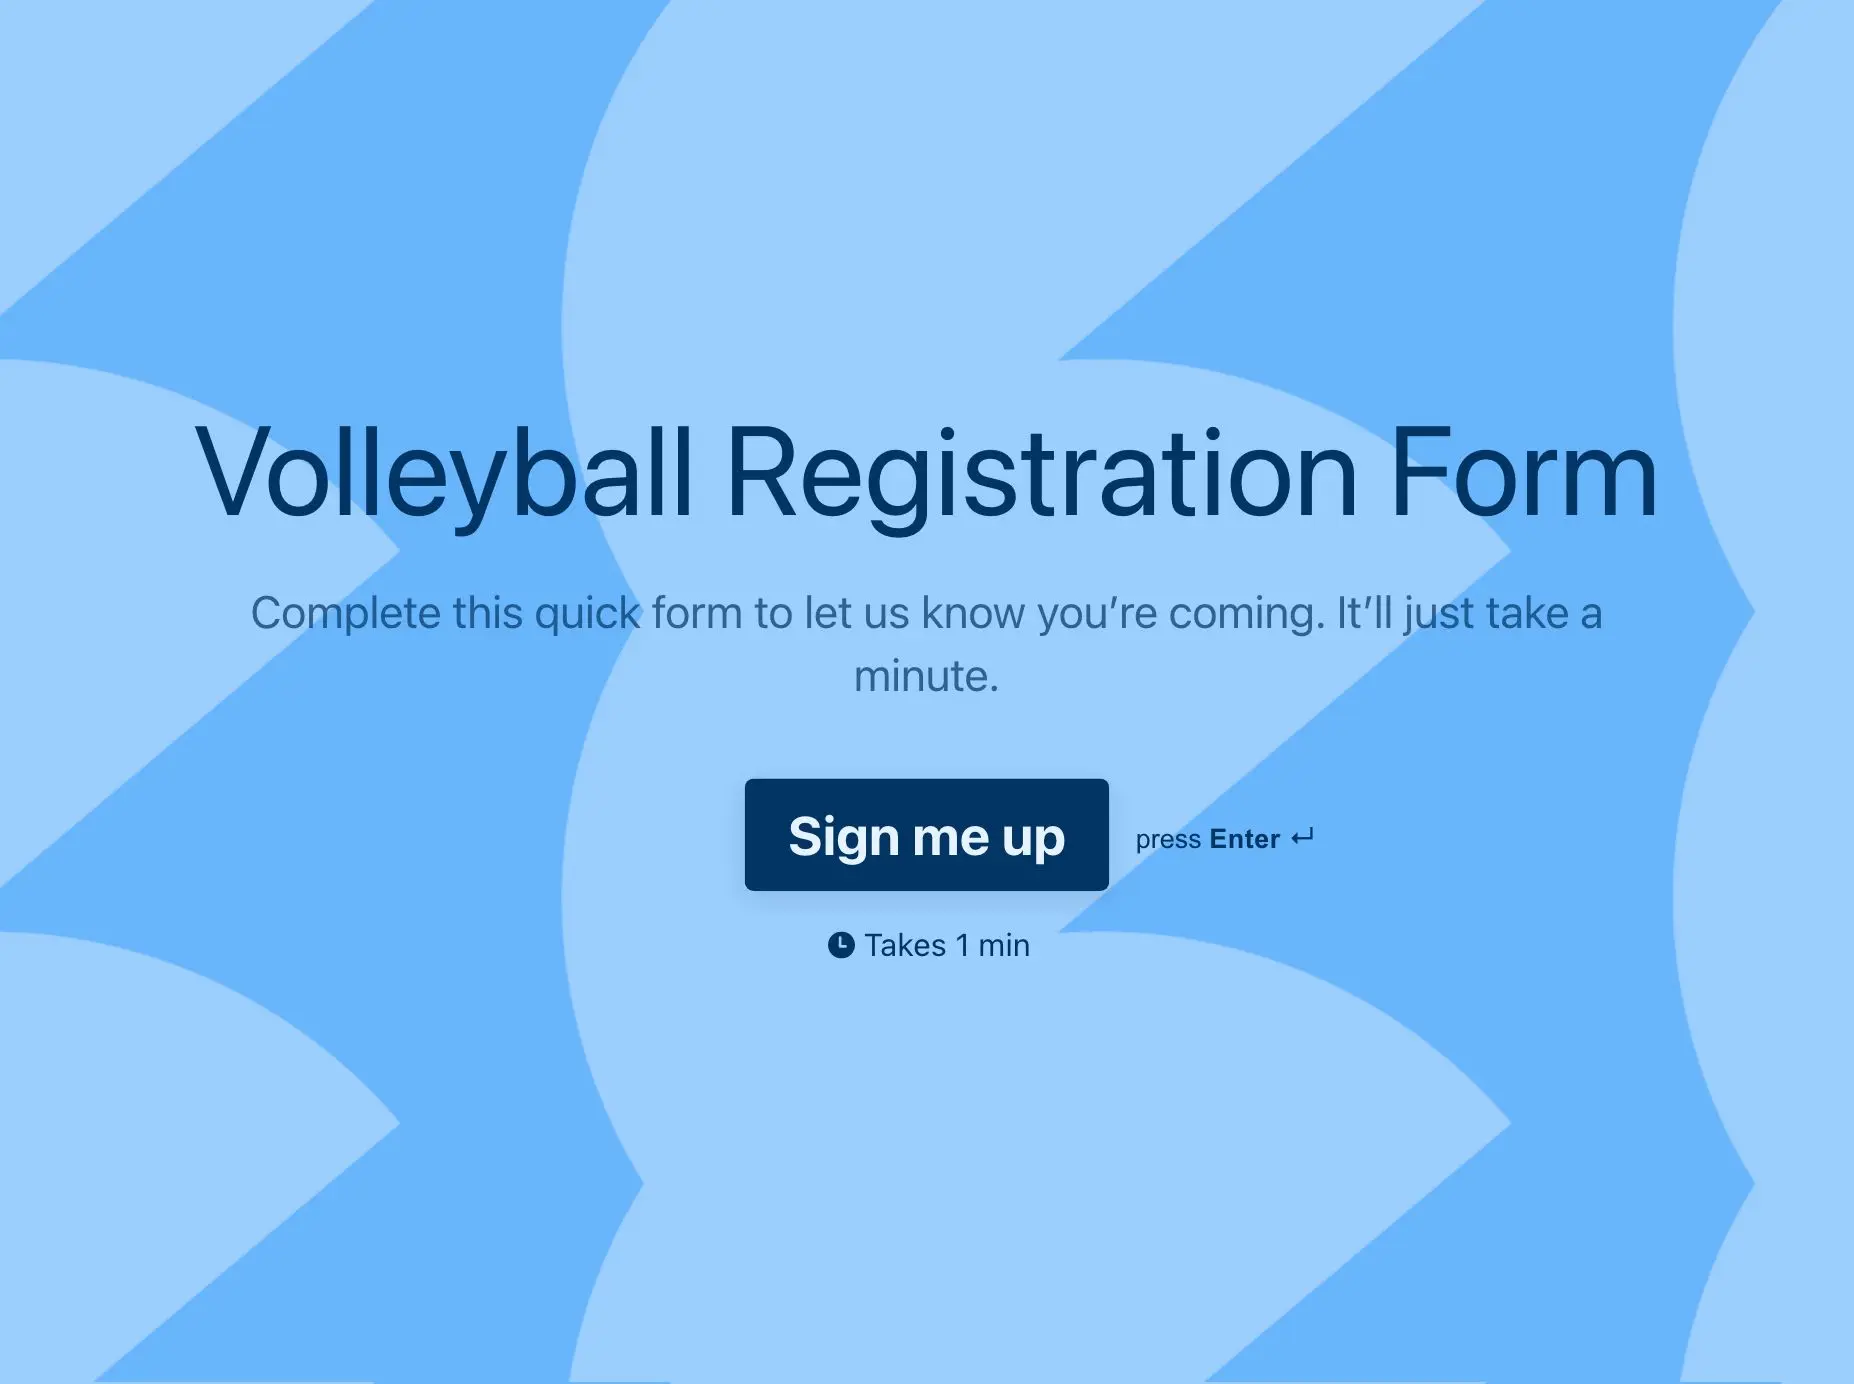 Volleyball Registration Form Template Hero